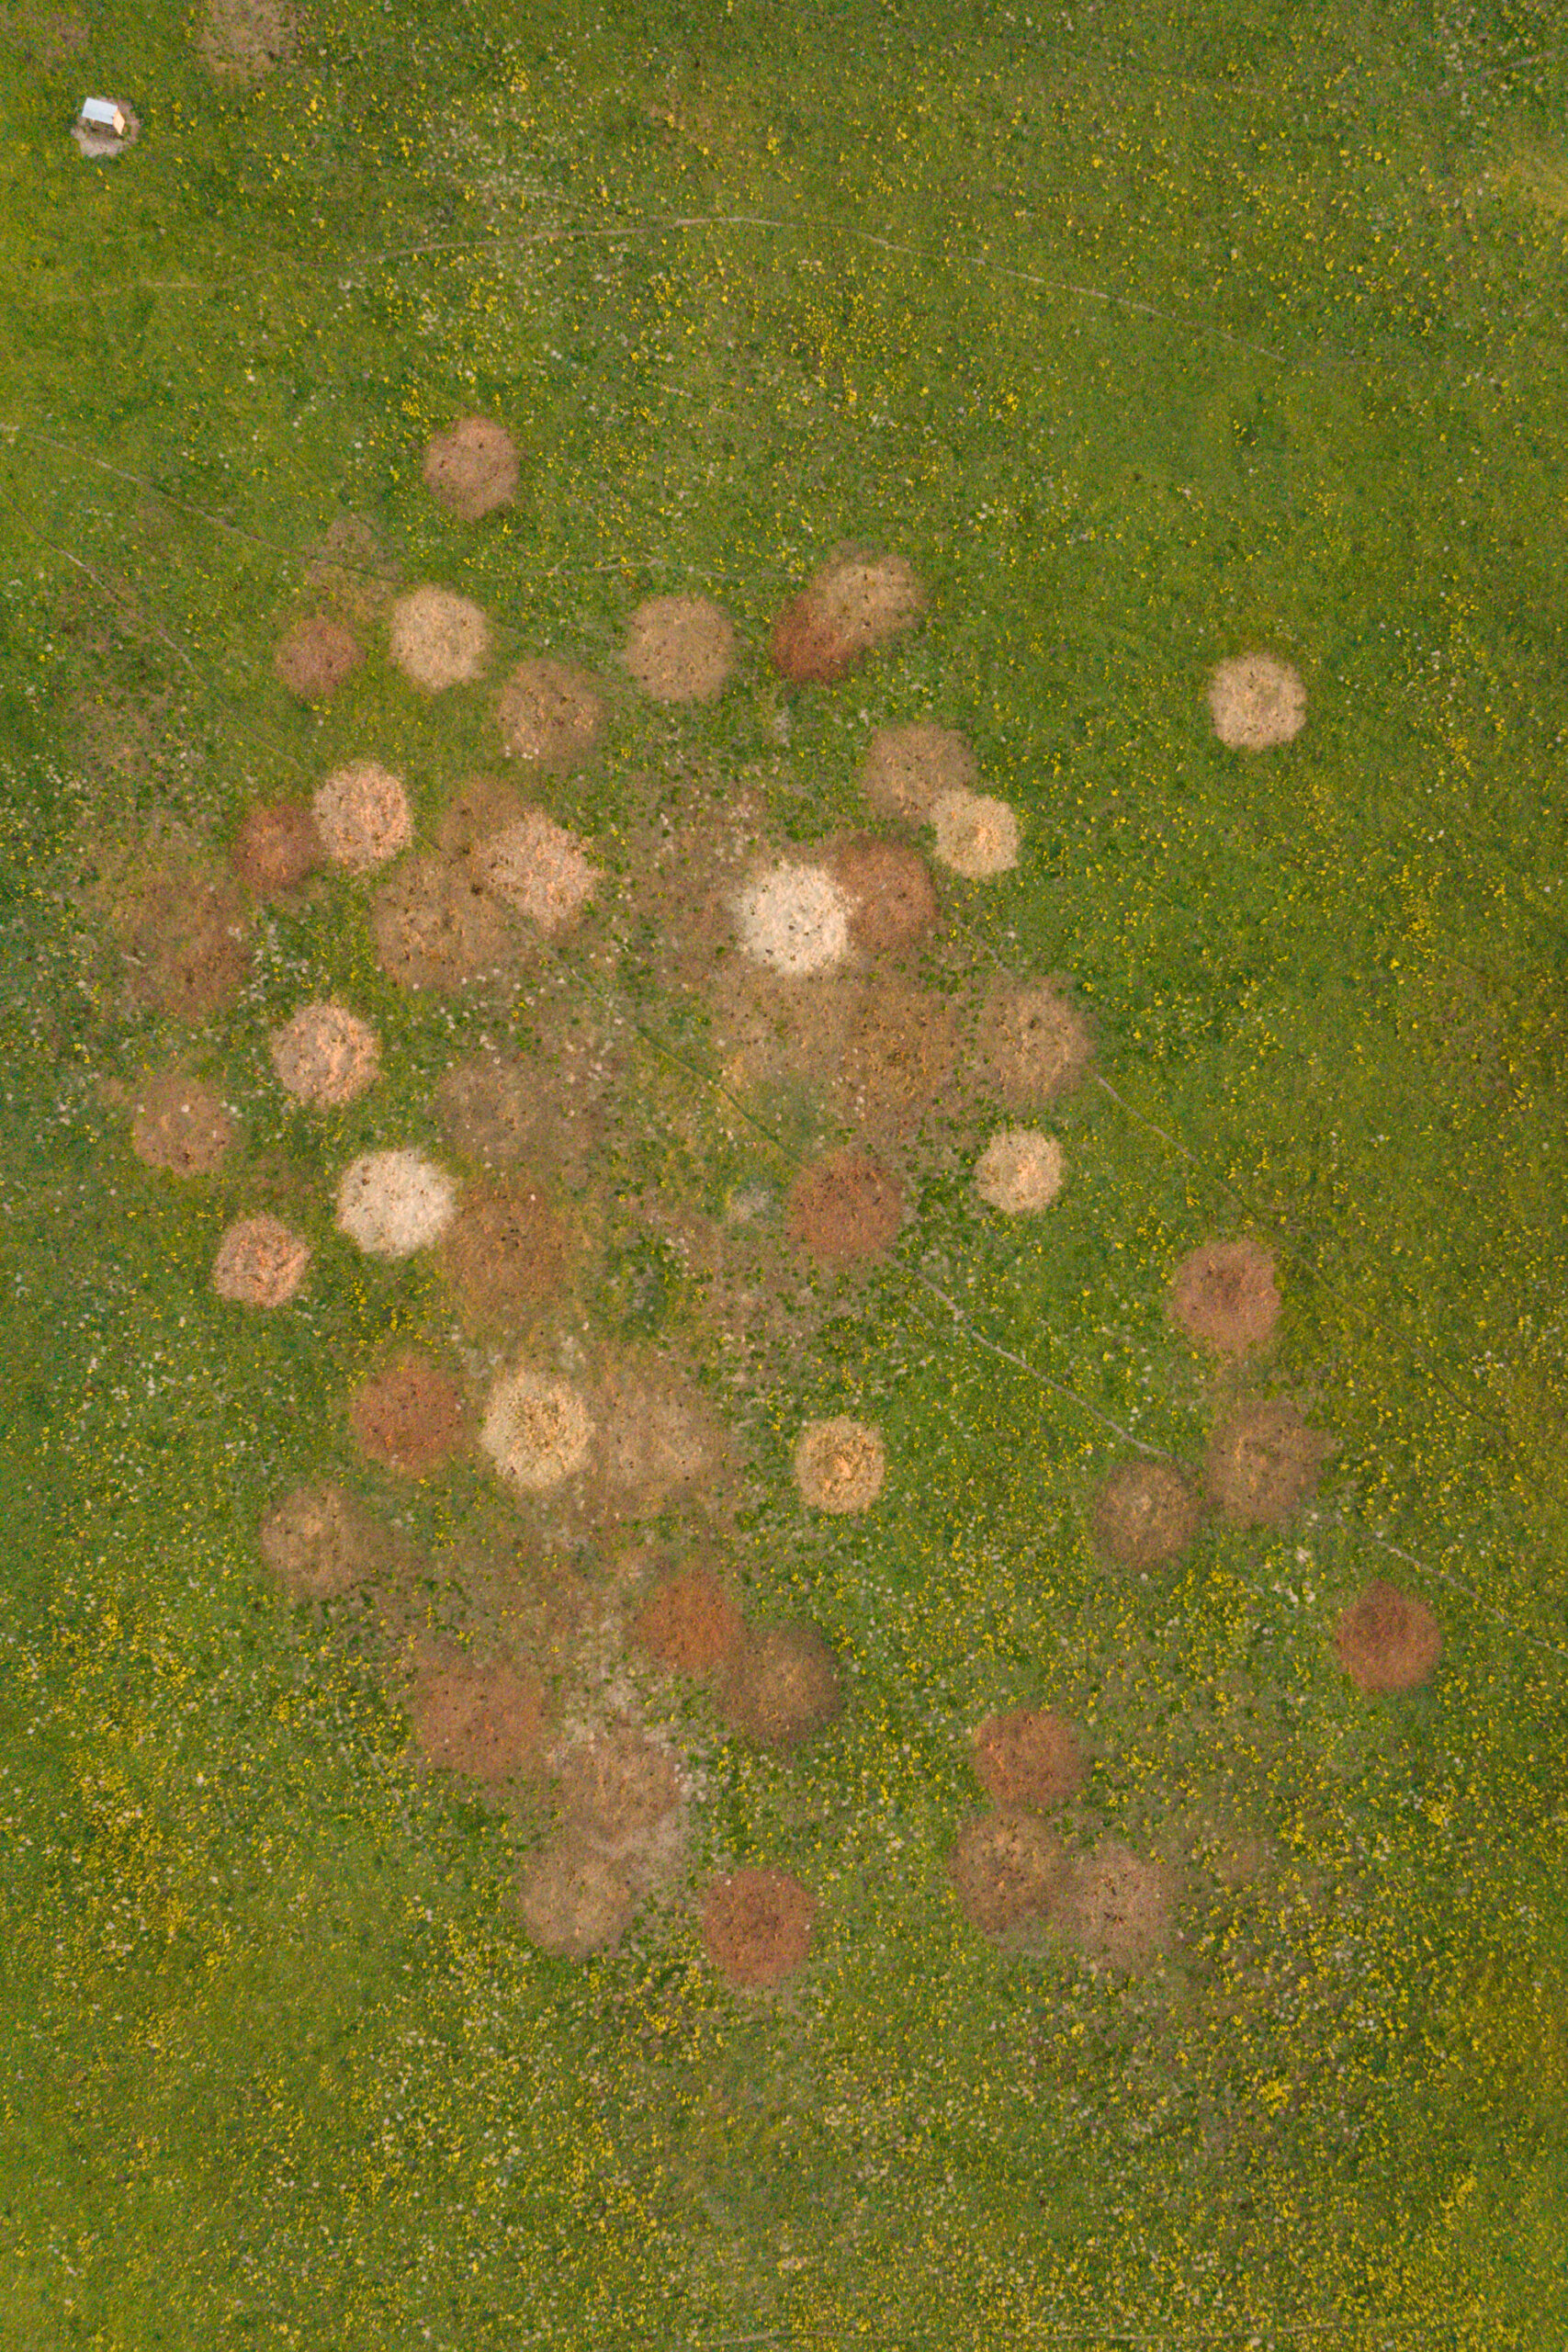 Aerial view of circles made on pasture by hay bails